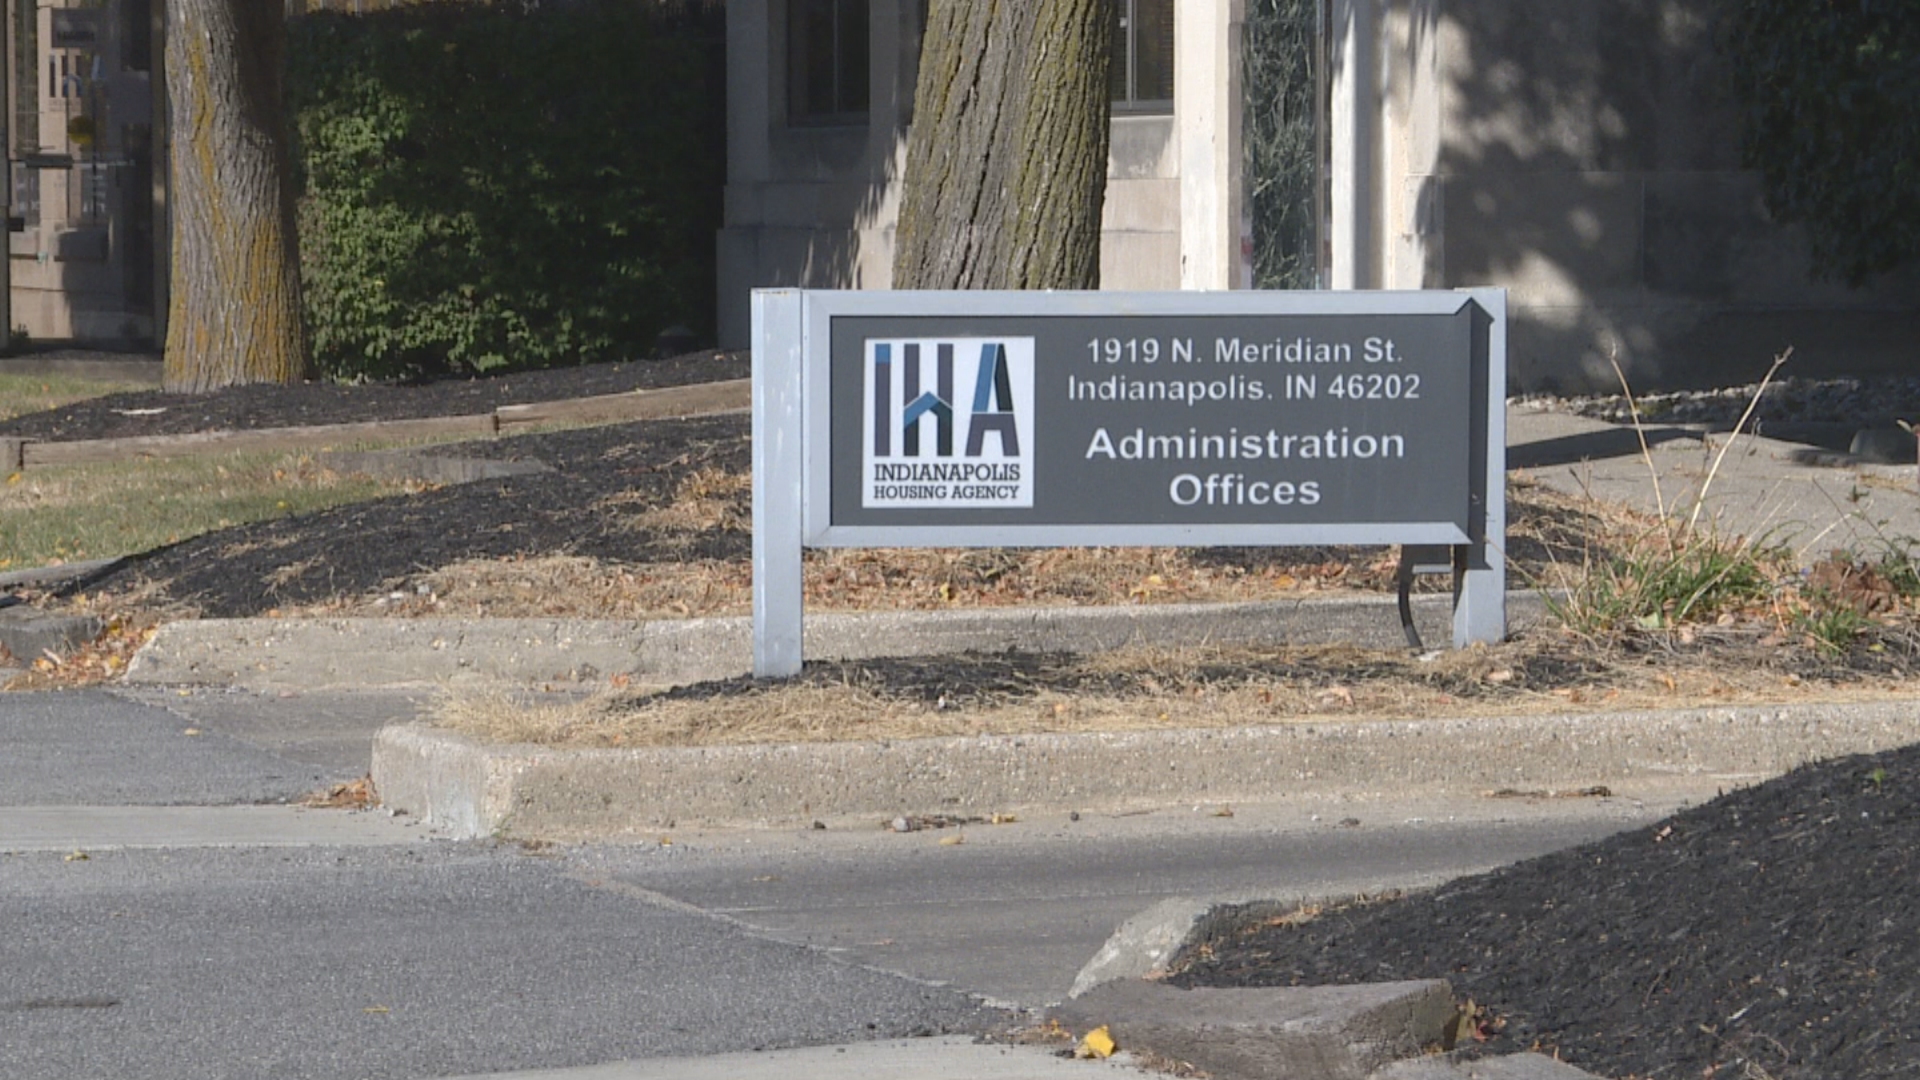 Lawsuit filed against Indianapolis Housing Authority over data breach